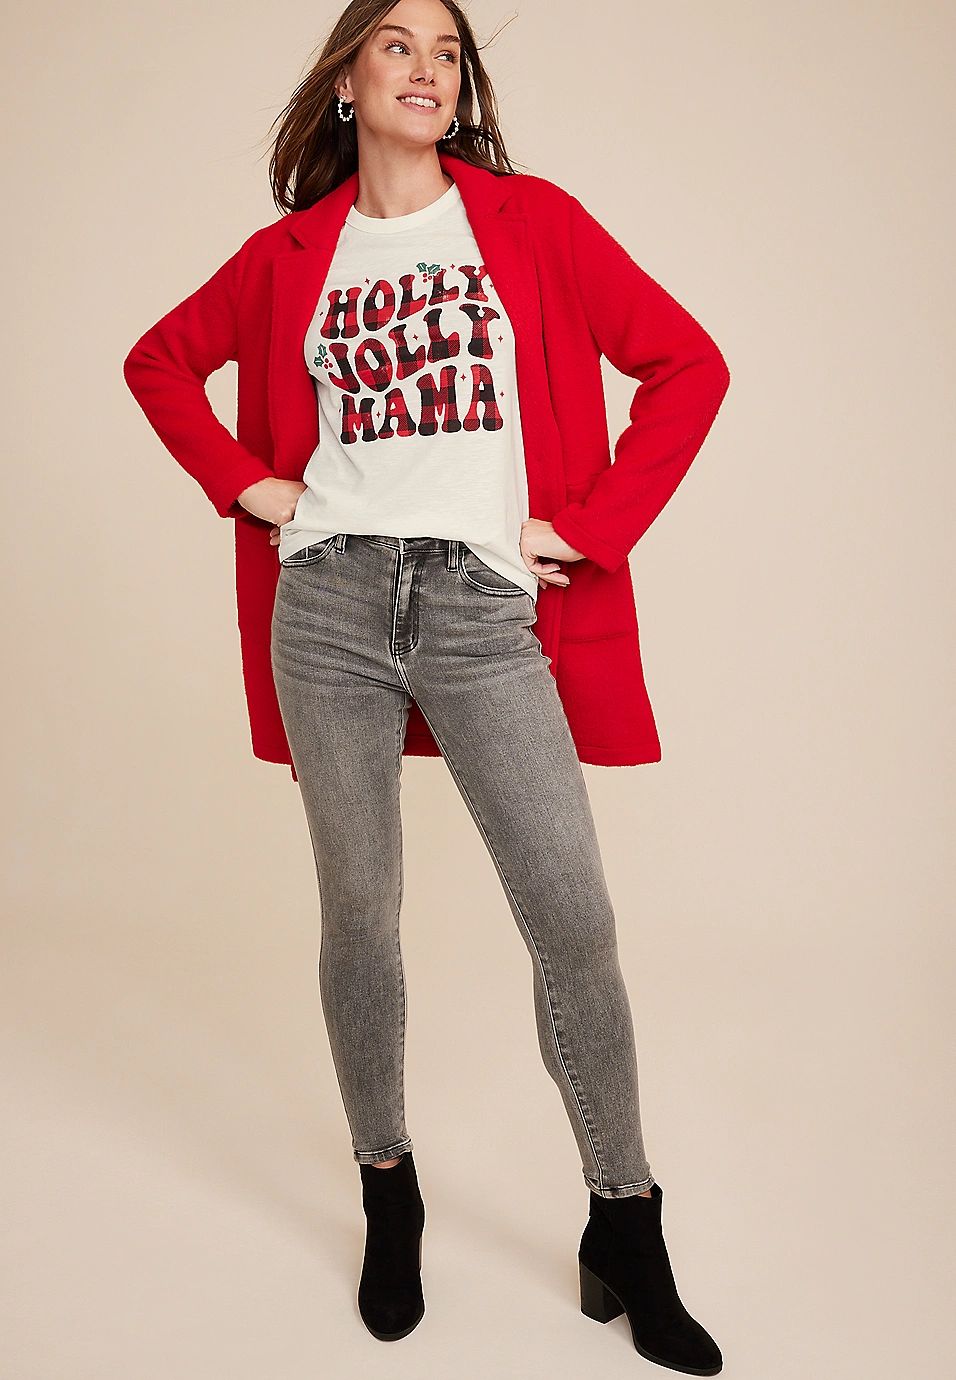 Holly Jolly Mama Graphic Tee | Maurices